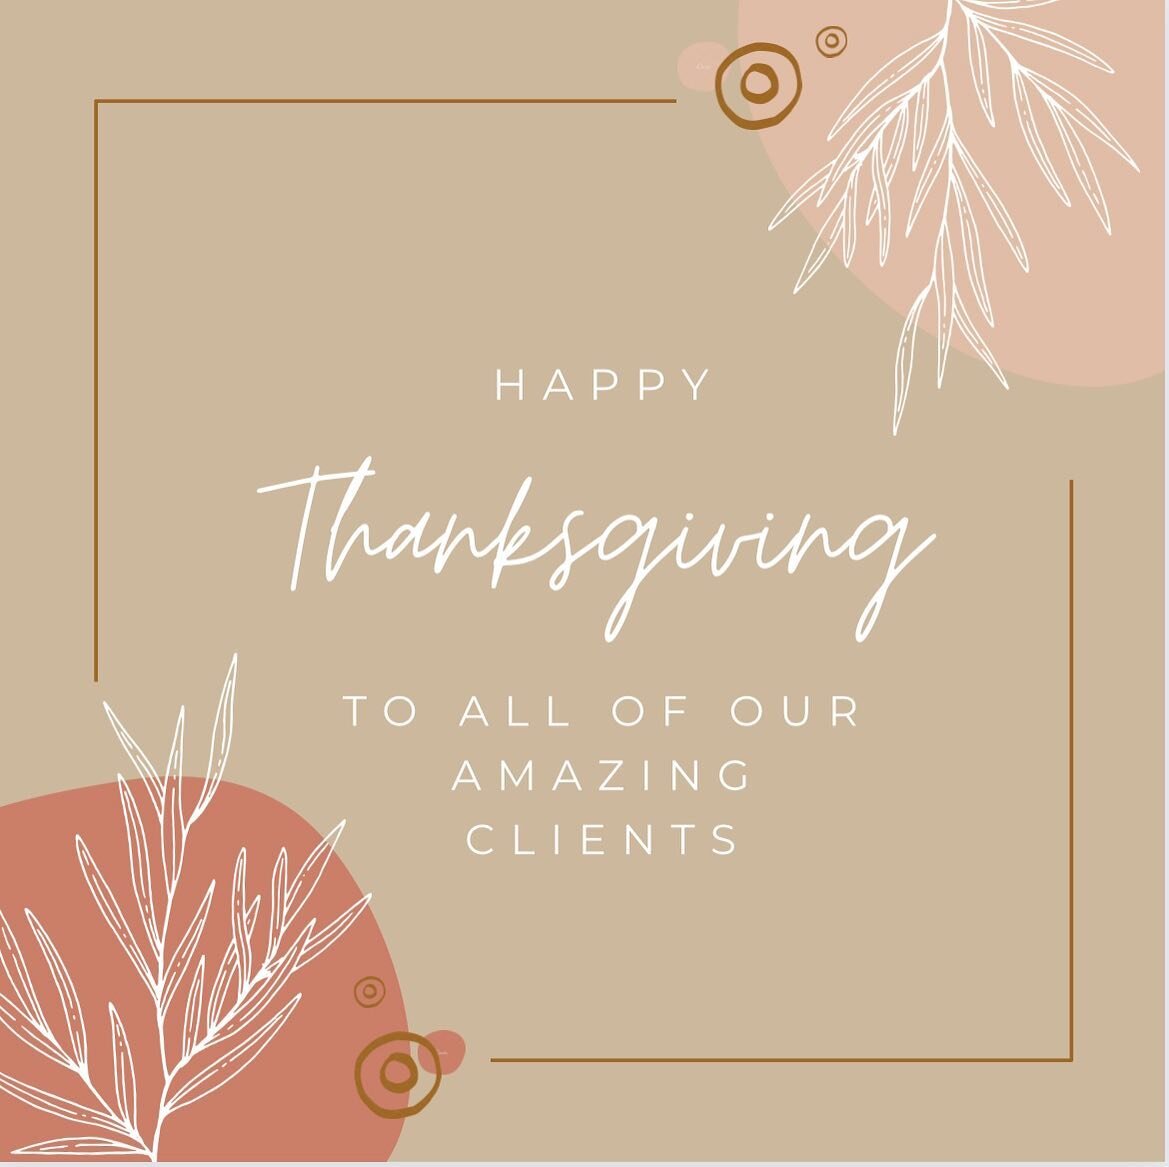 Wishing you a Happy and safe Thanksgiving to you and your families🥰

This year we are so thankful to have celebrated another year in business. That wouldn&rsquo;t be possible without each and every one of you. We are so unbelievably thankful for all